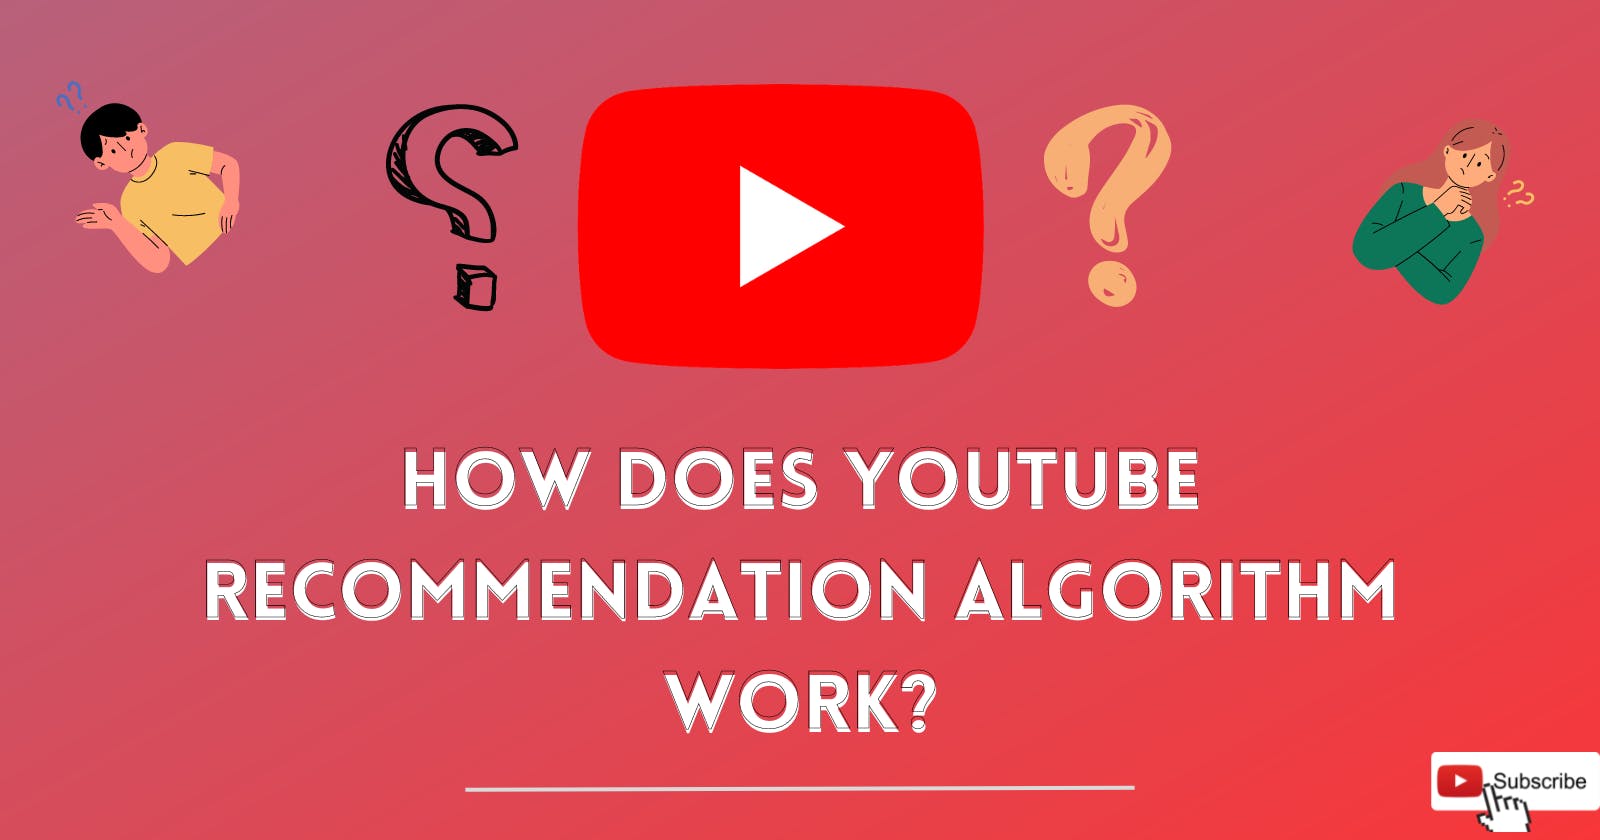 How Does YouTube Recommendation Algorithm Work?